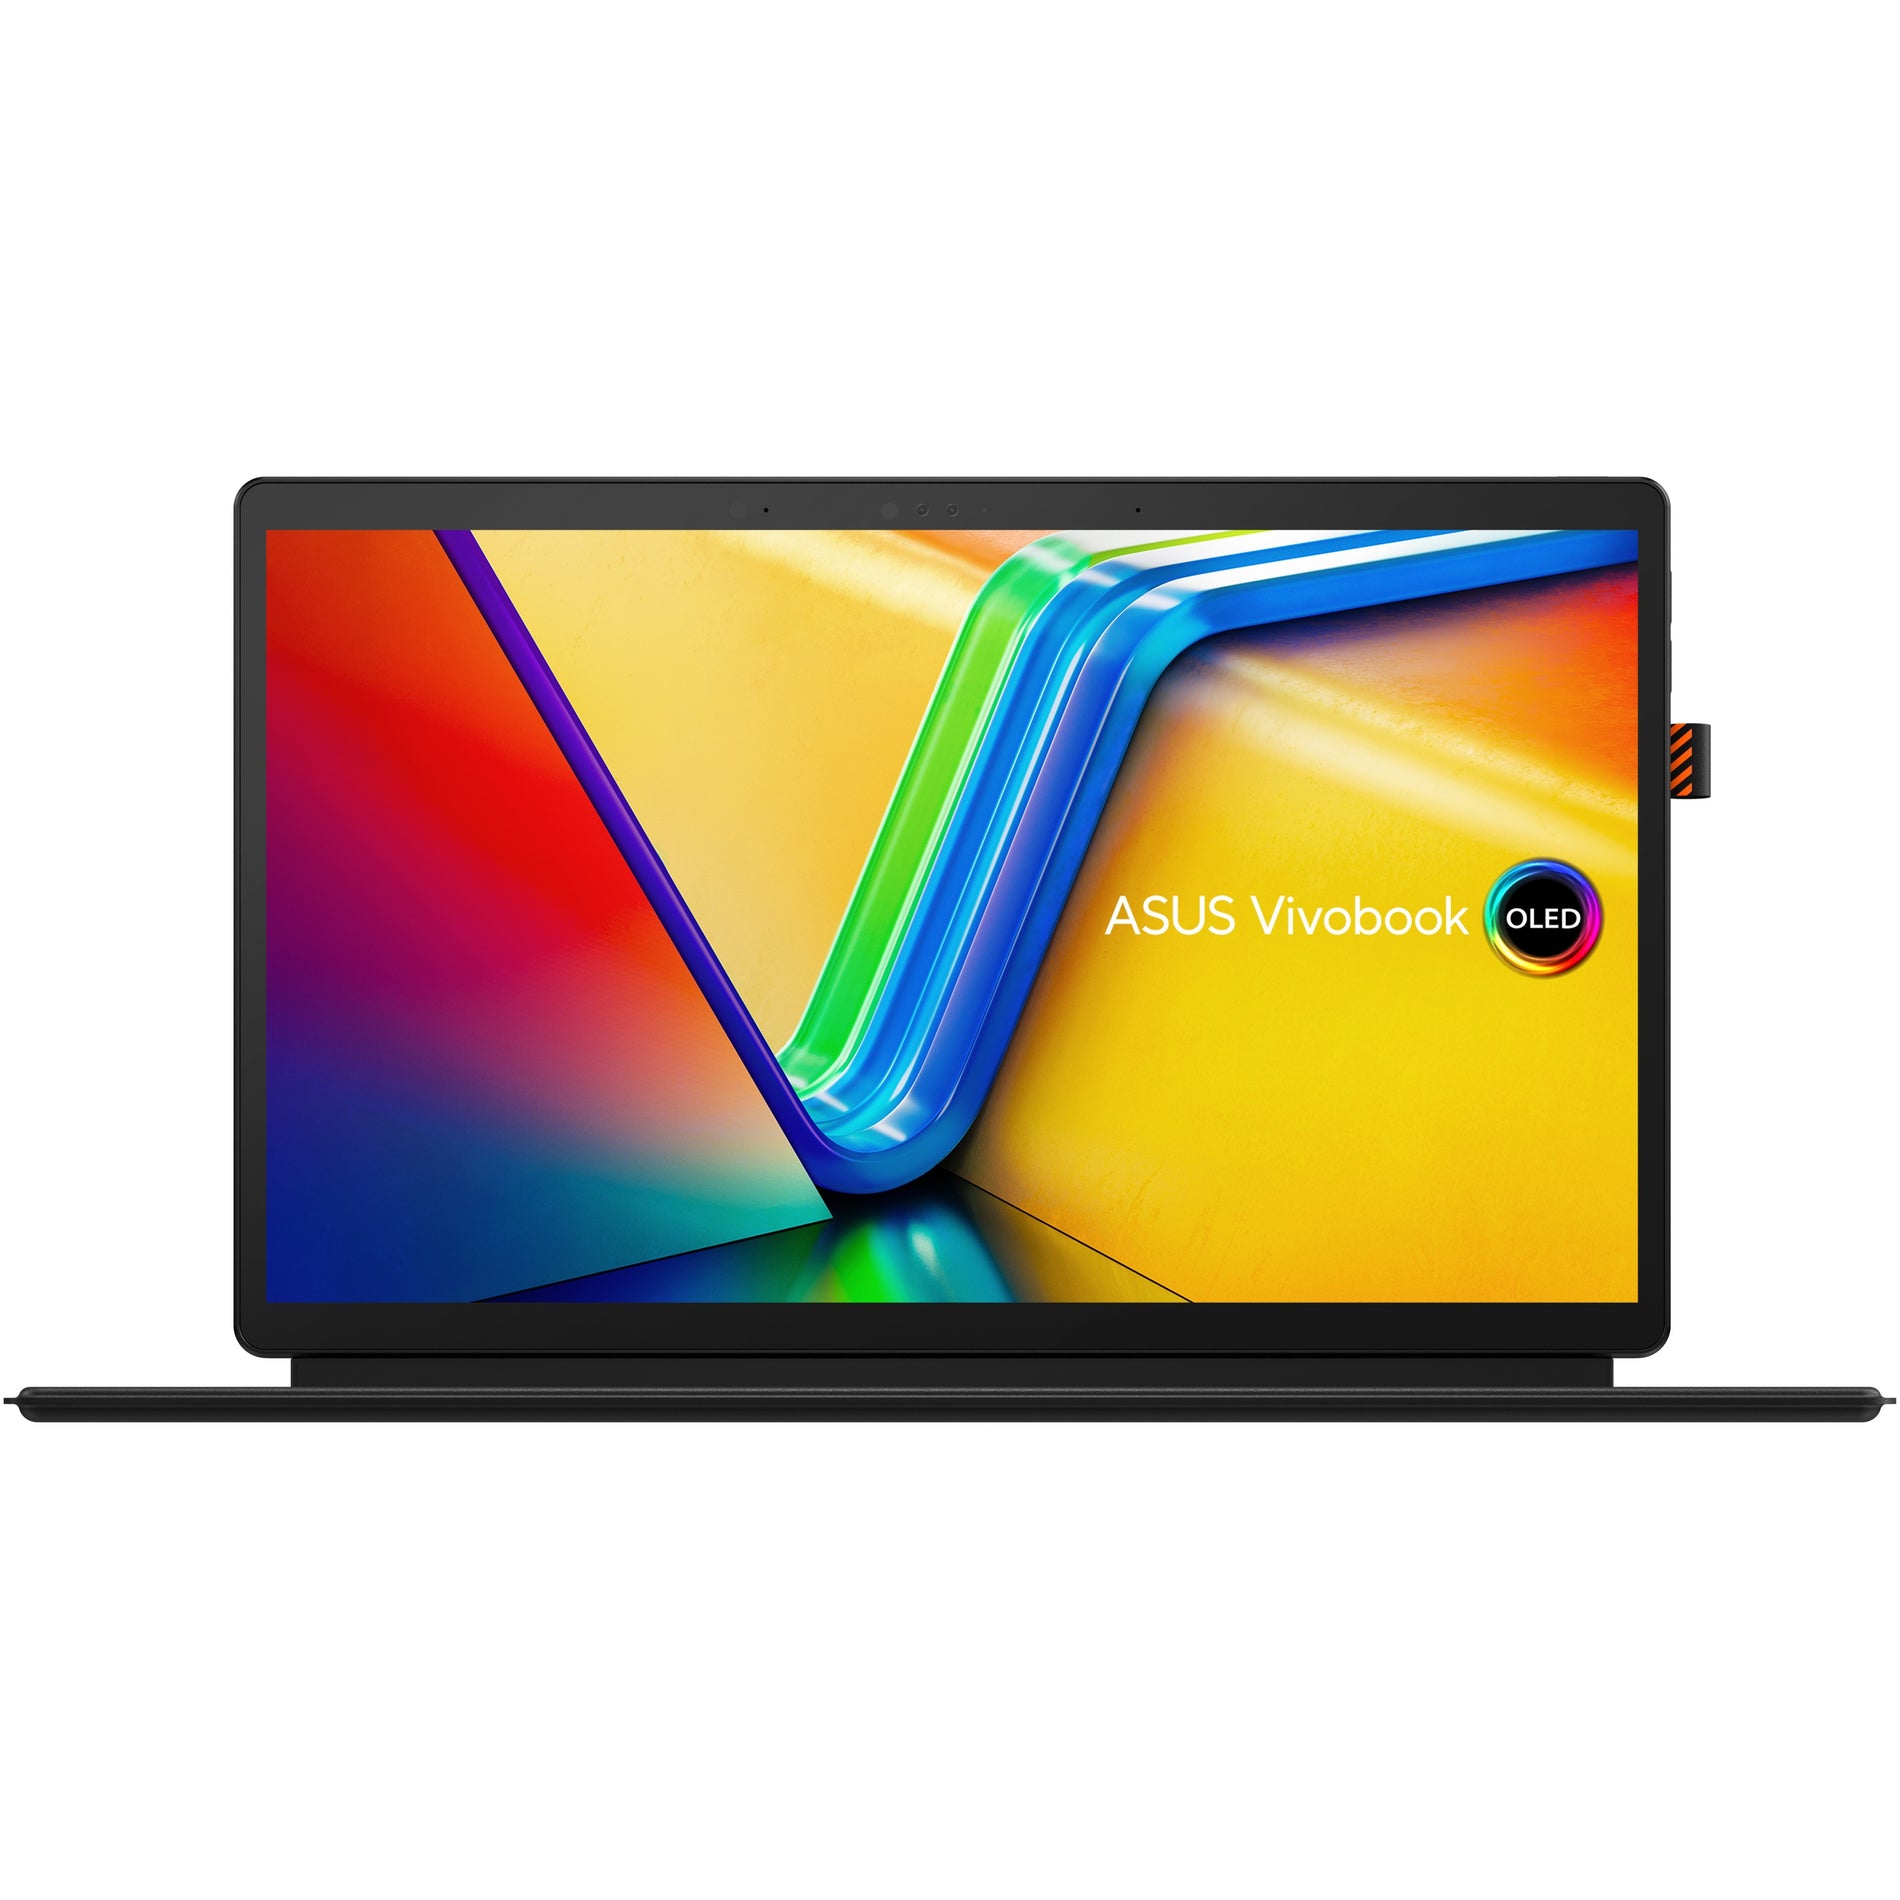 Asus Vivobook 13 Slate OLED T3304GA-DS34T 2 in 1 Notebook, 13.3" Full HD OLED Touchscreen, Intel Core i3, 8GB RAM, 256GB SSD, Windows 11 Home in S mode